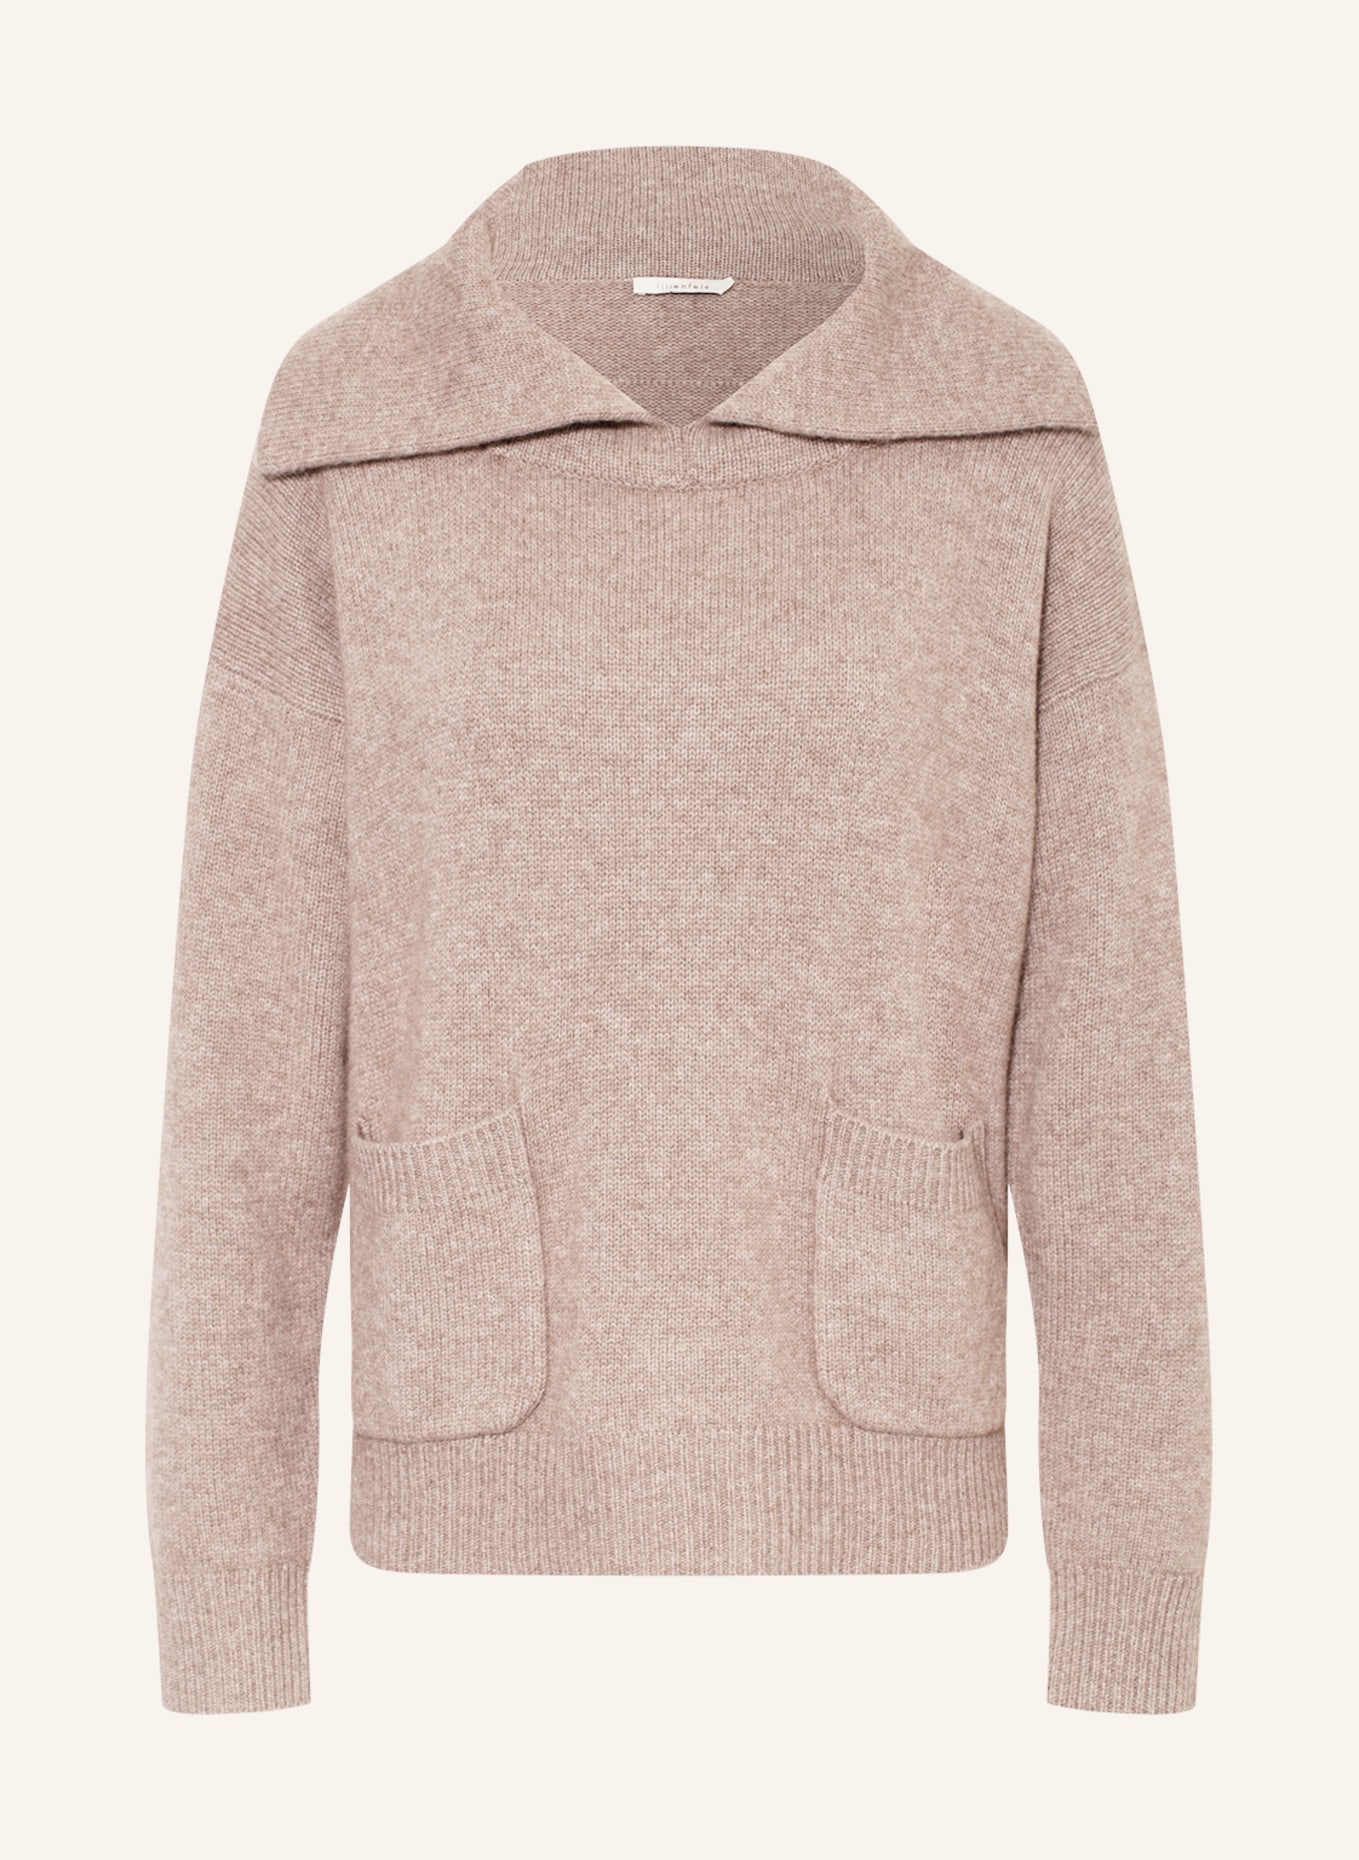 lilienfels Pullover mit Cashmere, Farbe: TAUPE (Bild 1)